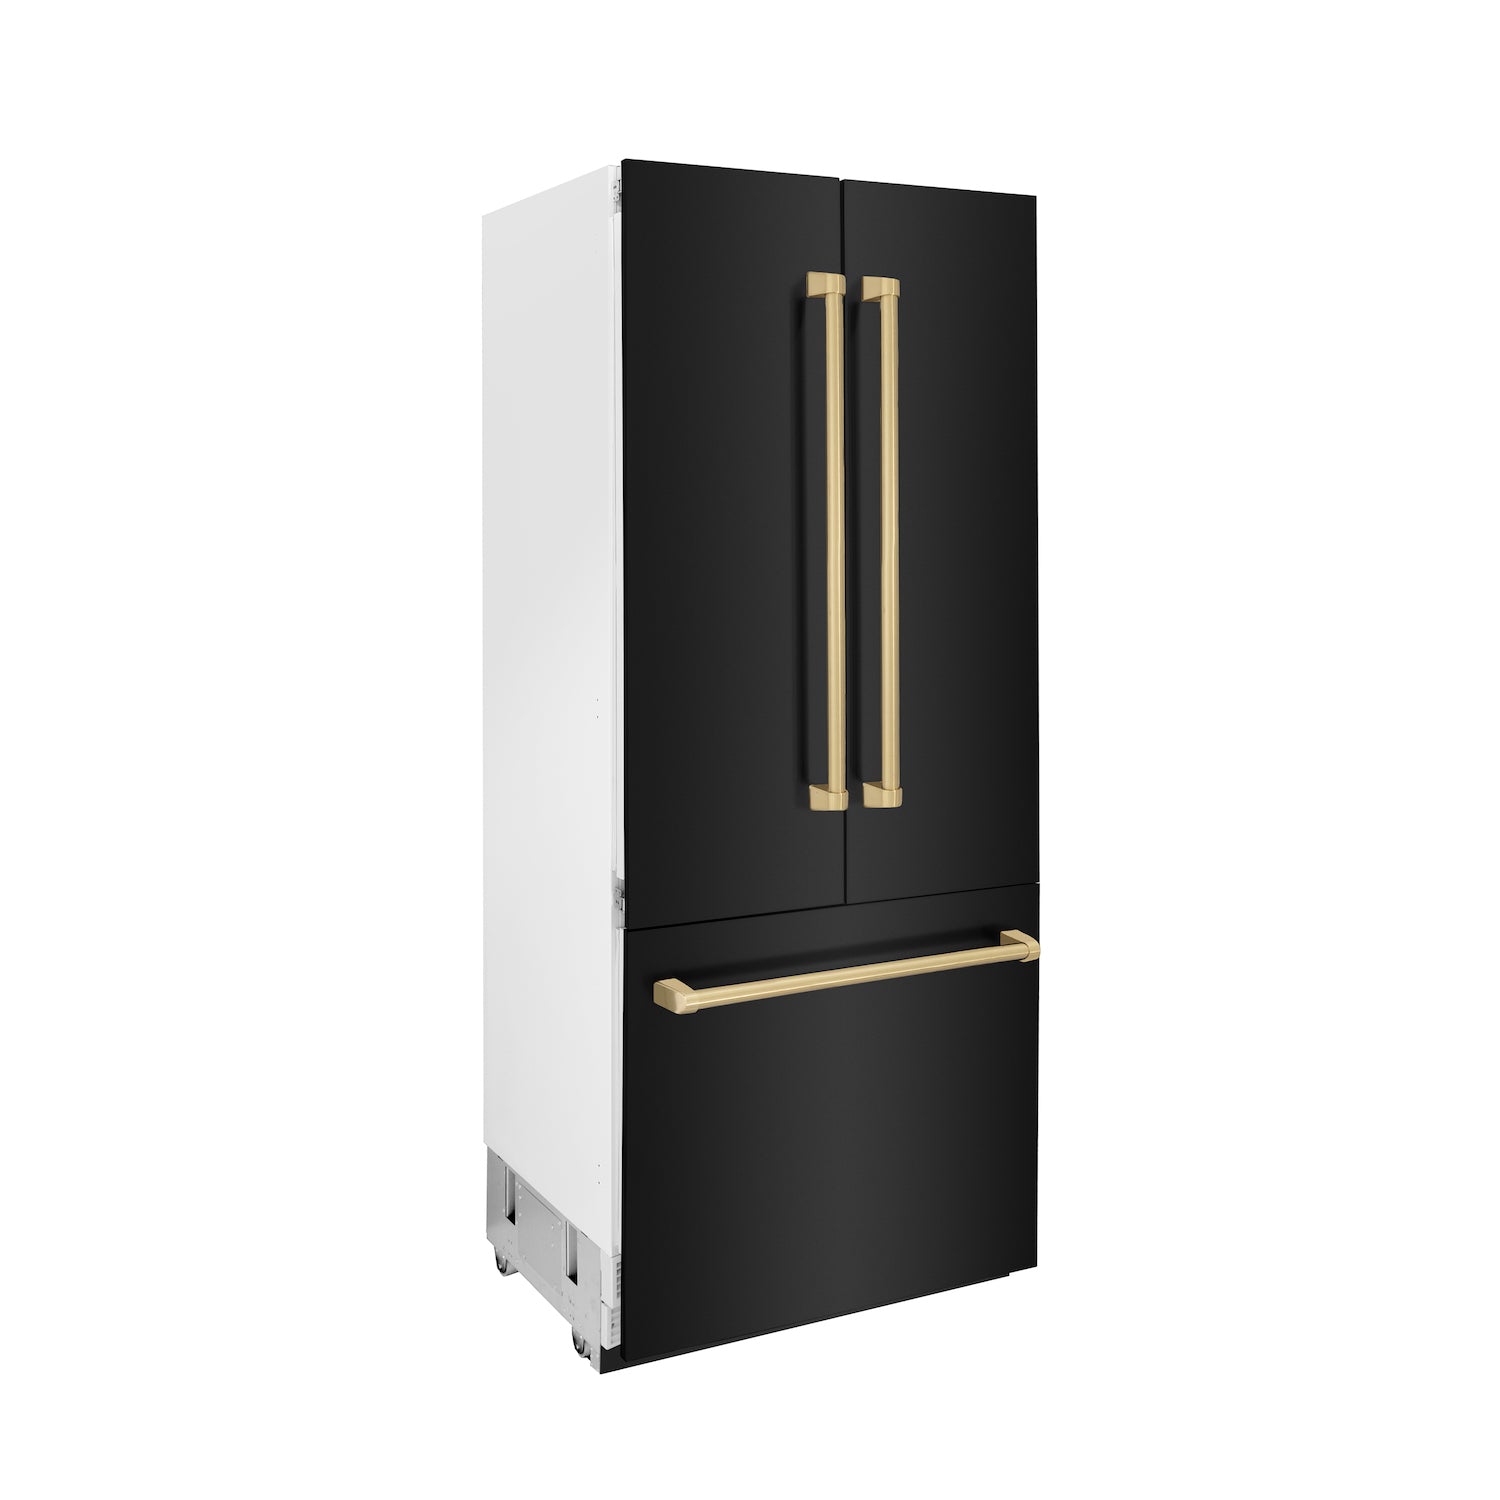 ZLINE 36" Autograph Edition Built-in French Door Refrigerator in Black Stainless Steel with Champagne Bronze Accents side.